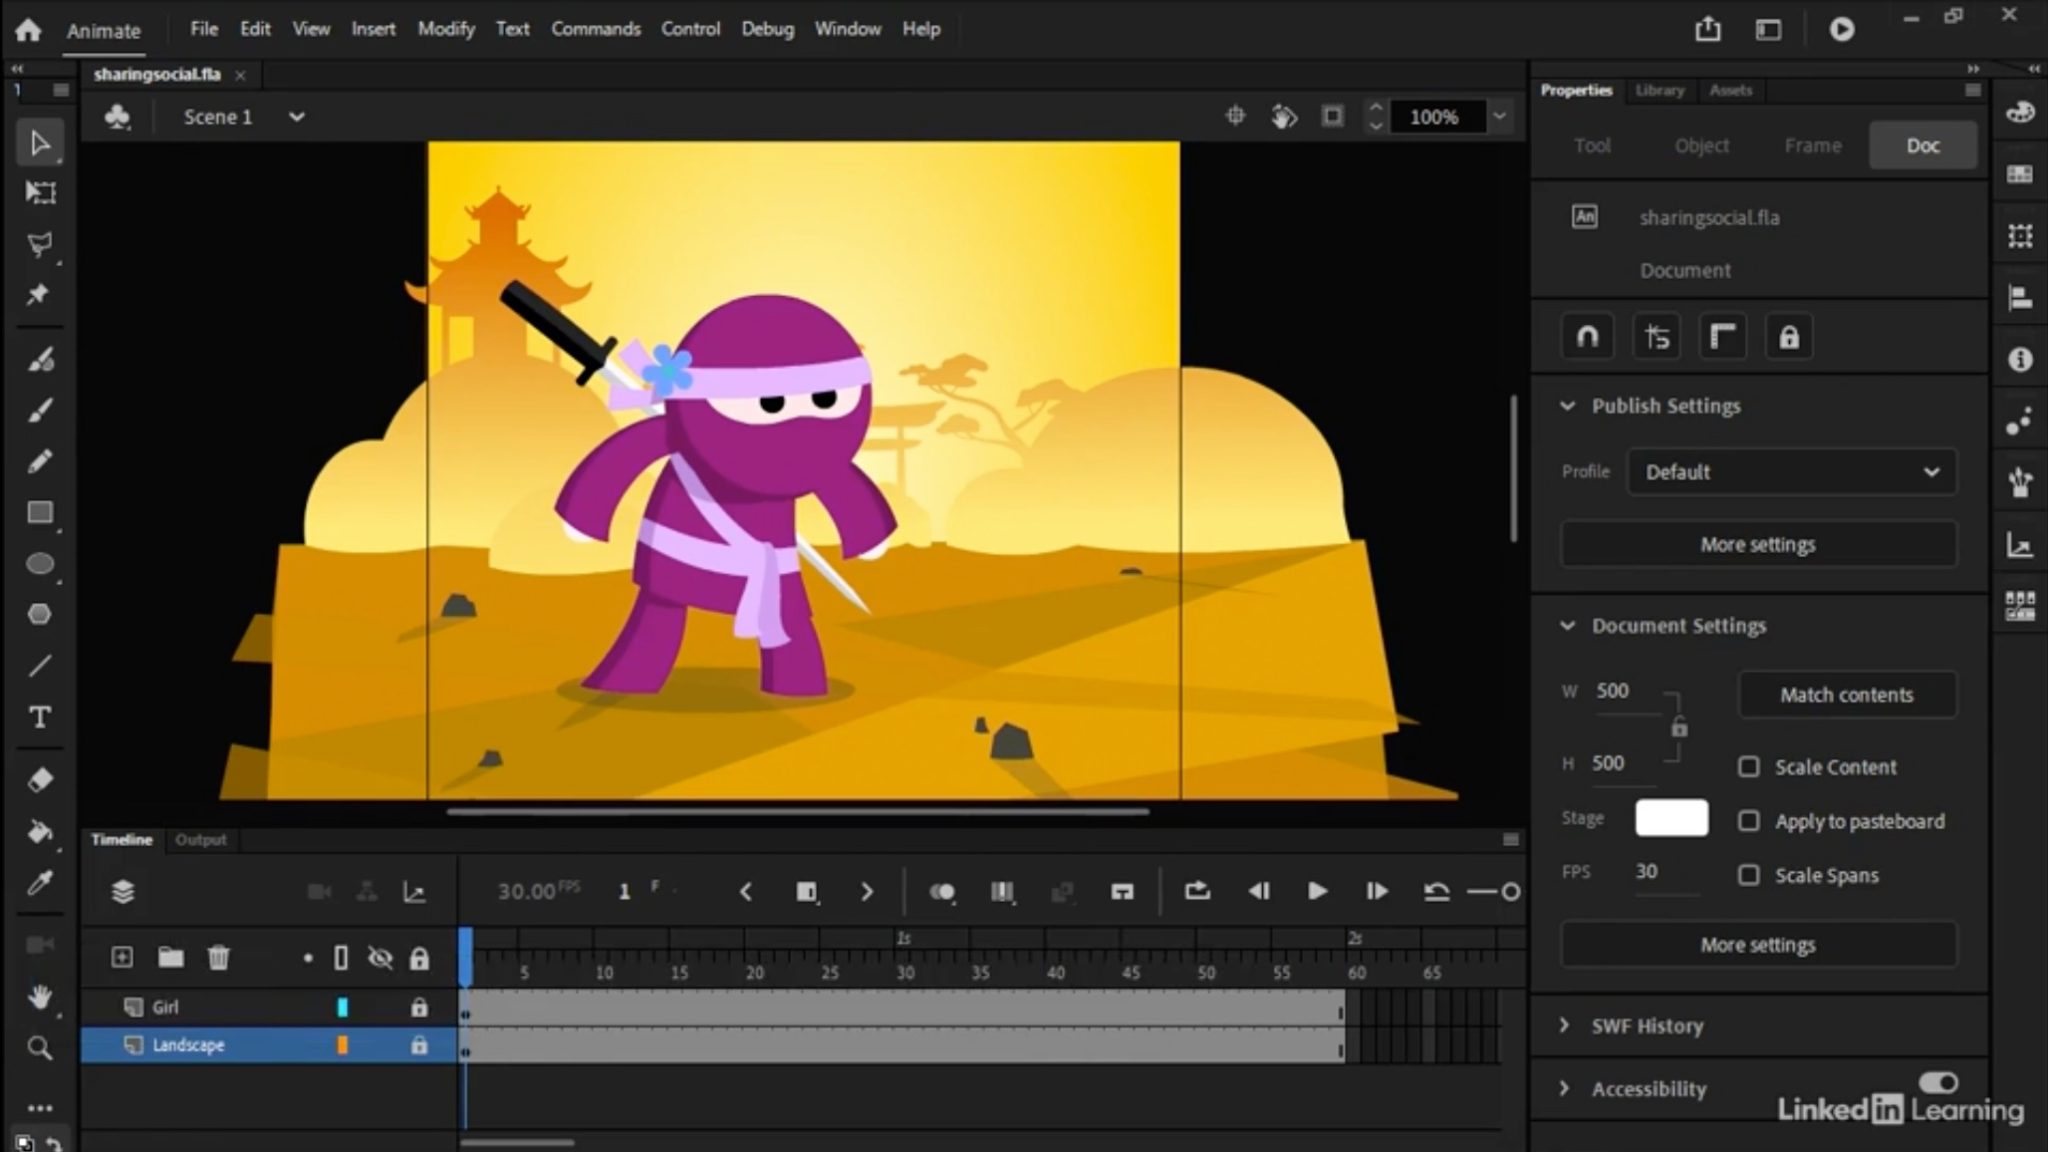 download the last version for android Adobe Animate 2024 v24.0.0.305